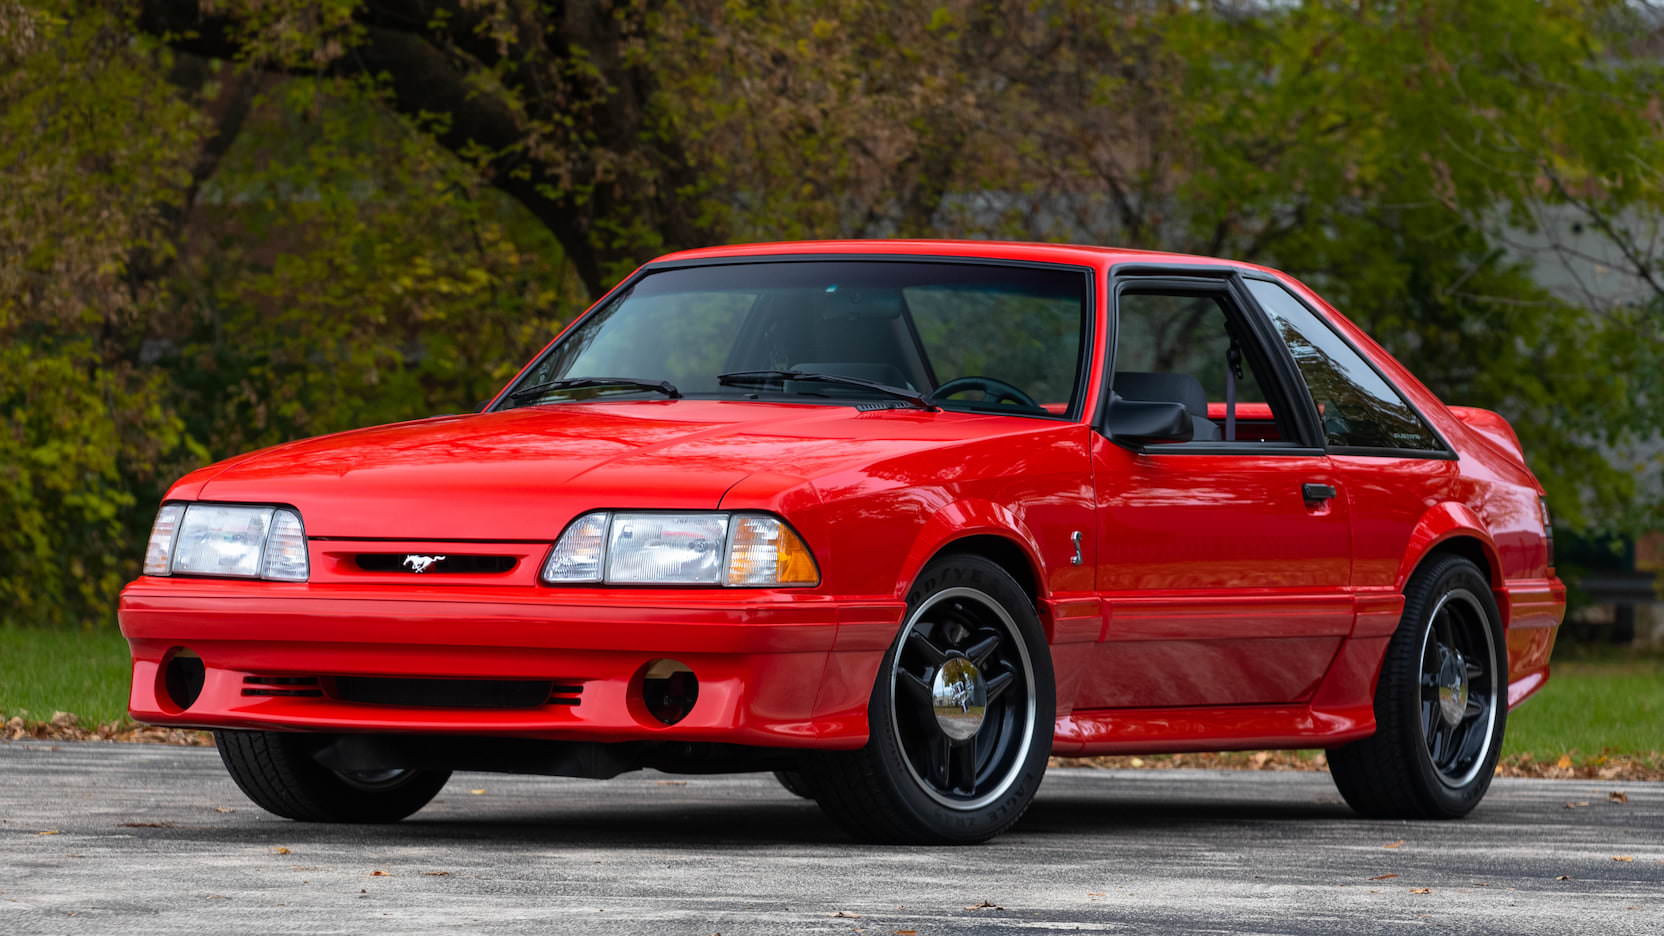 1993 SVT Mustang Cobra R - The Ultimate Version Of The Fox Body